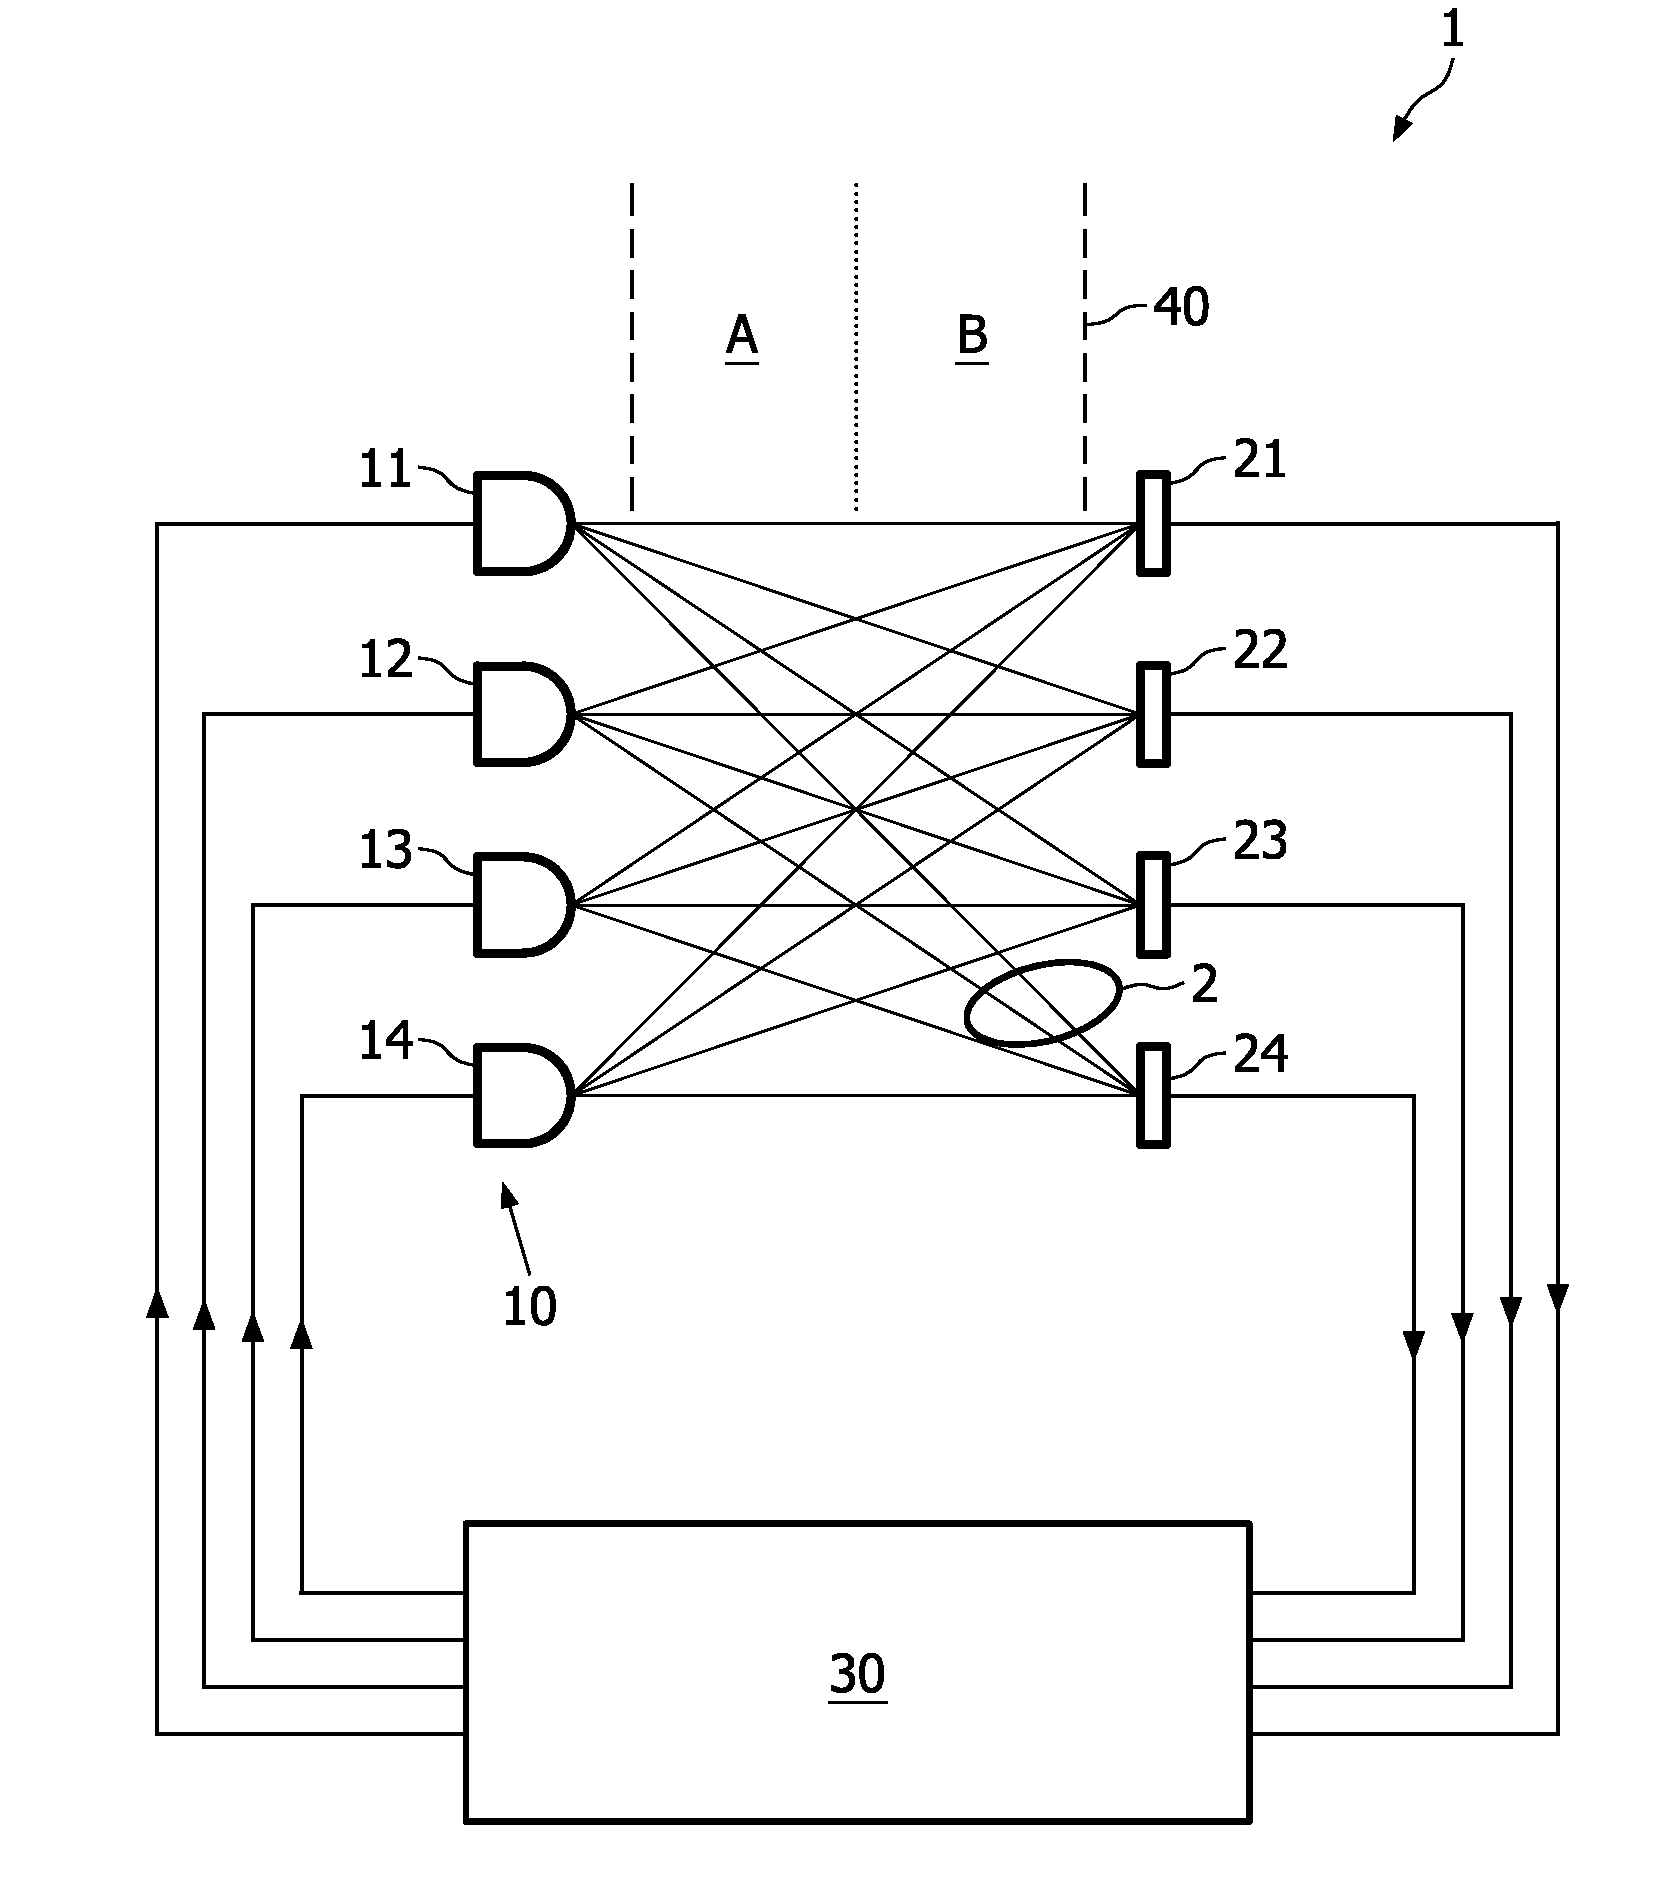 Line-of-sight optical detection system, and communication system